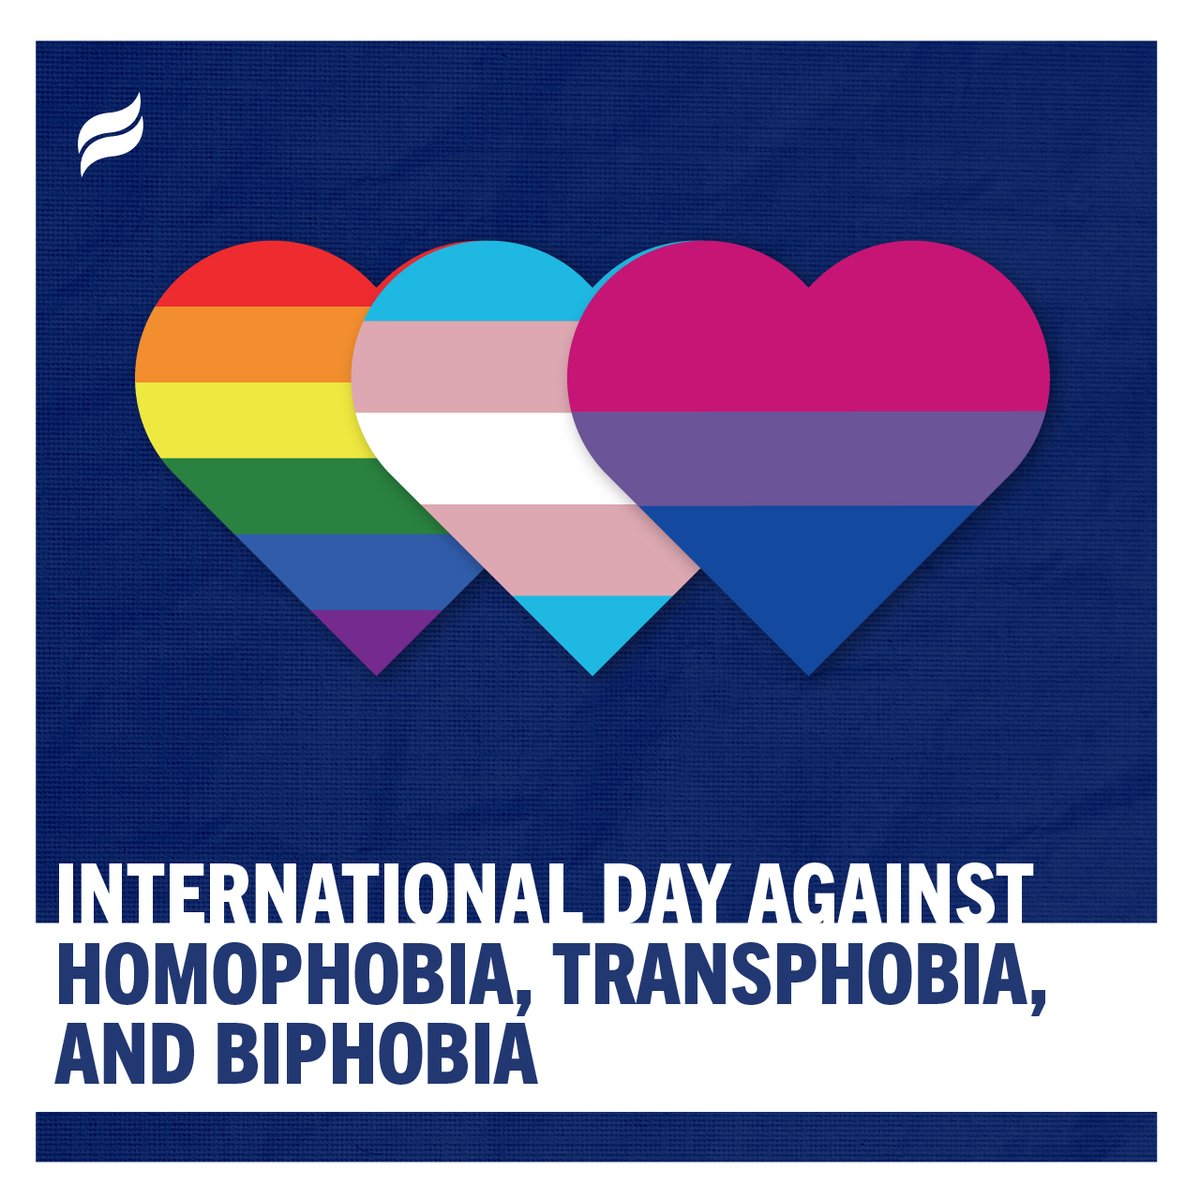 The International Day Against Homophobia, Transphobia, and Biphobia on May 17 is an important day dedicated to raising awareness of the discrimination and violence experienced by the LGBTQIA2+ community worldwide. (1/2)